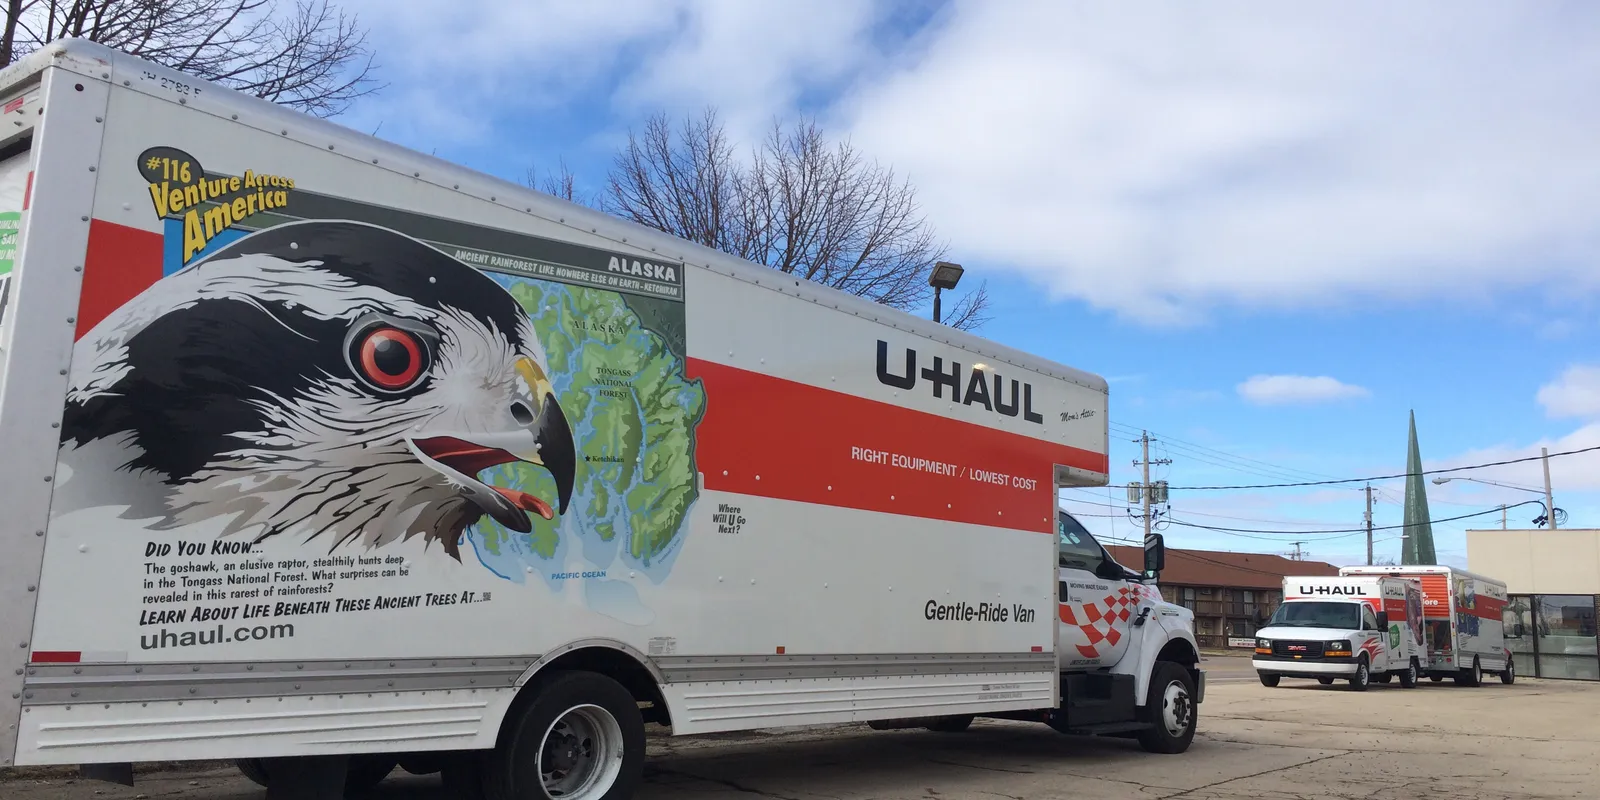 The Average Cost of U-Haul Truck Rental Prices